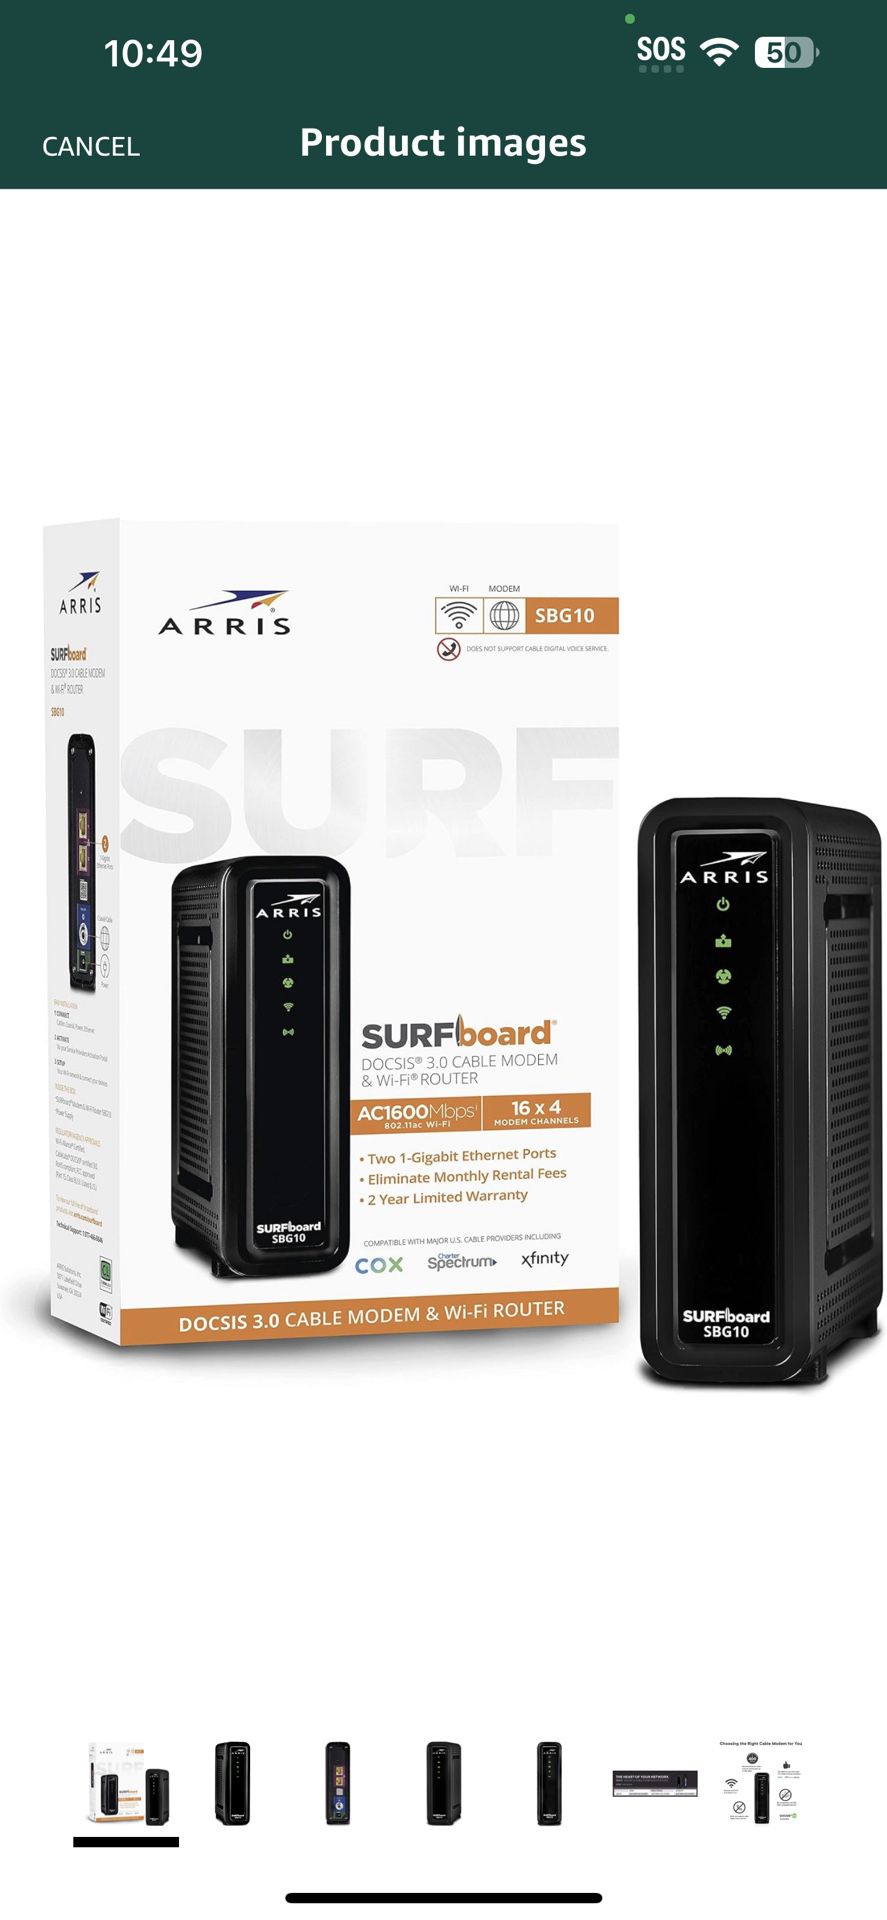 arris surfboard ac1600 dual band router with 16x4 docsis 3.0 cable modem black